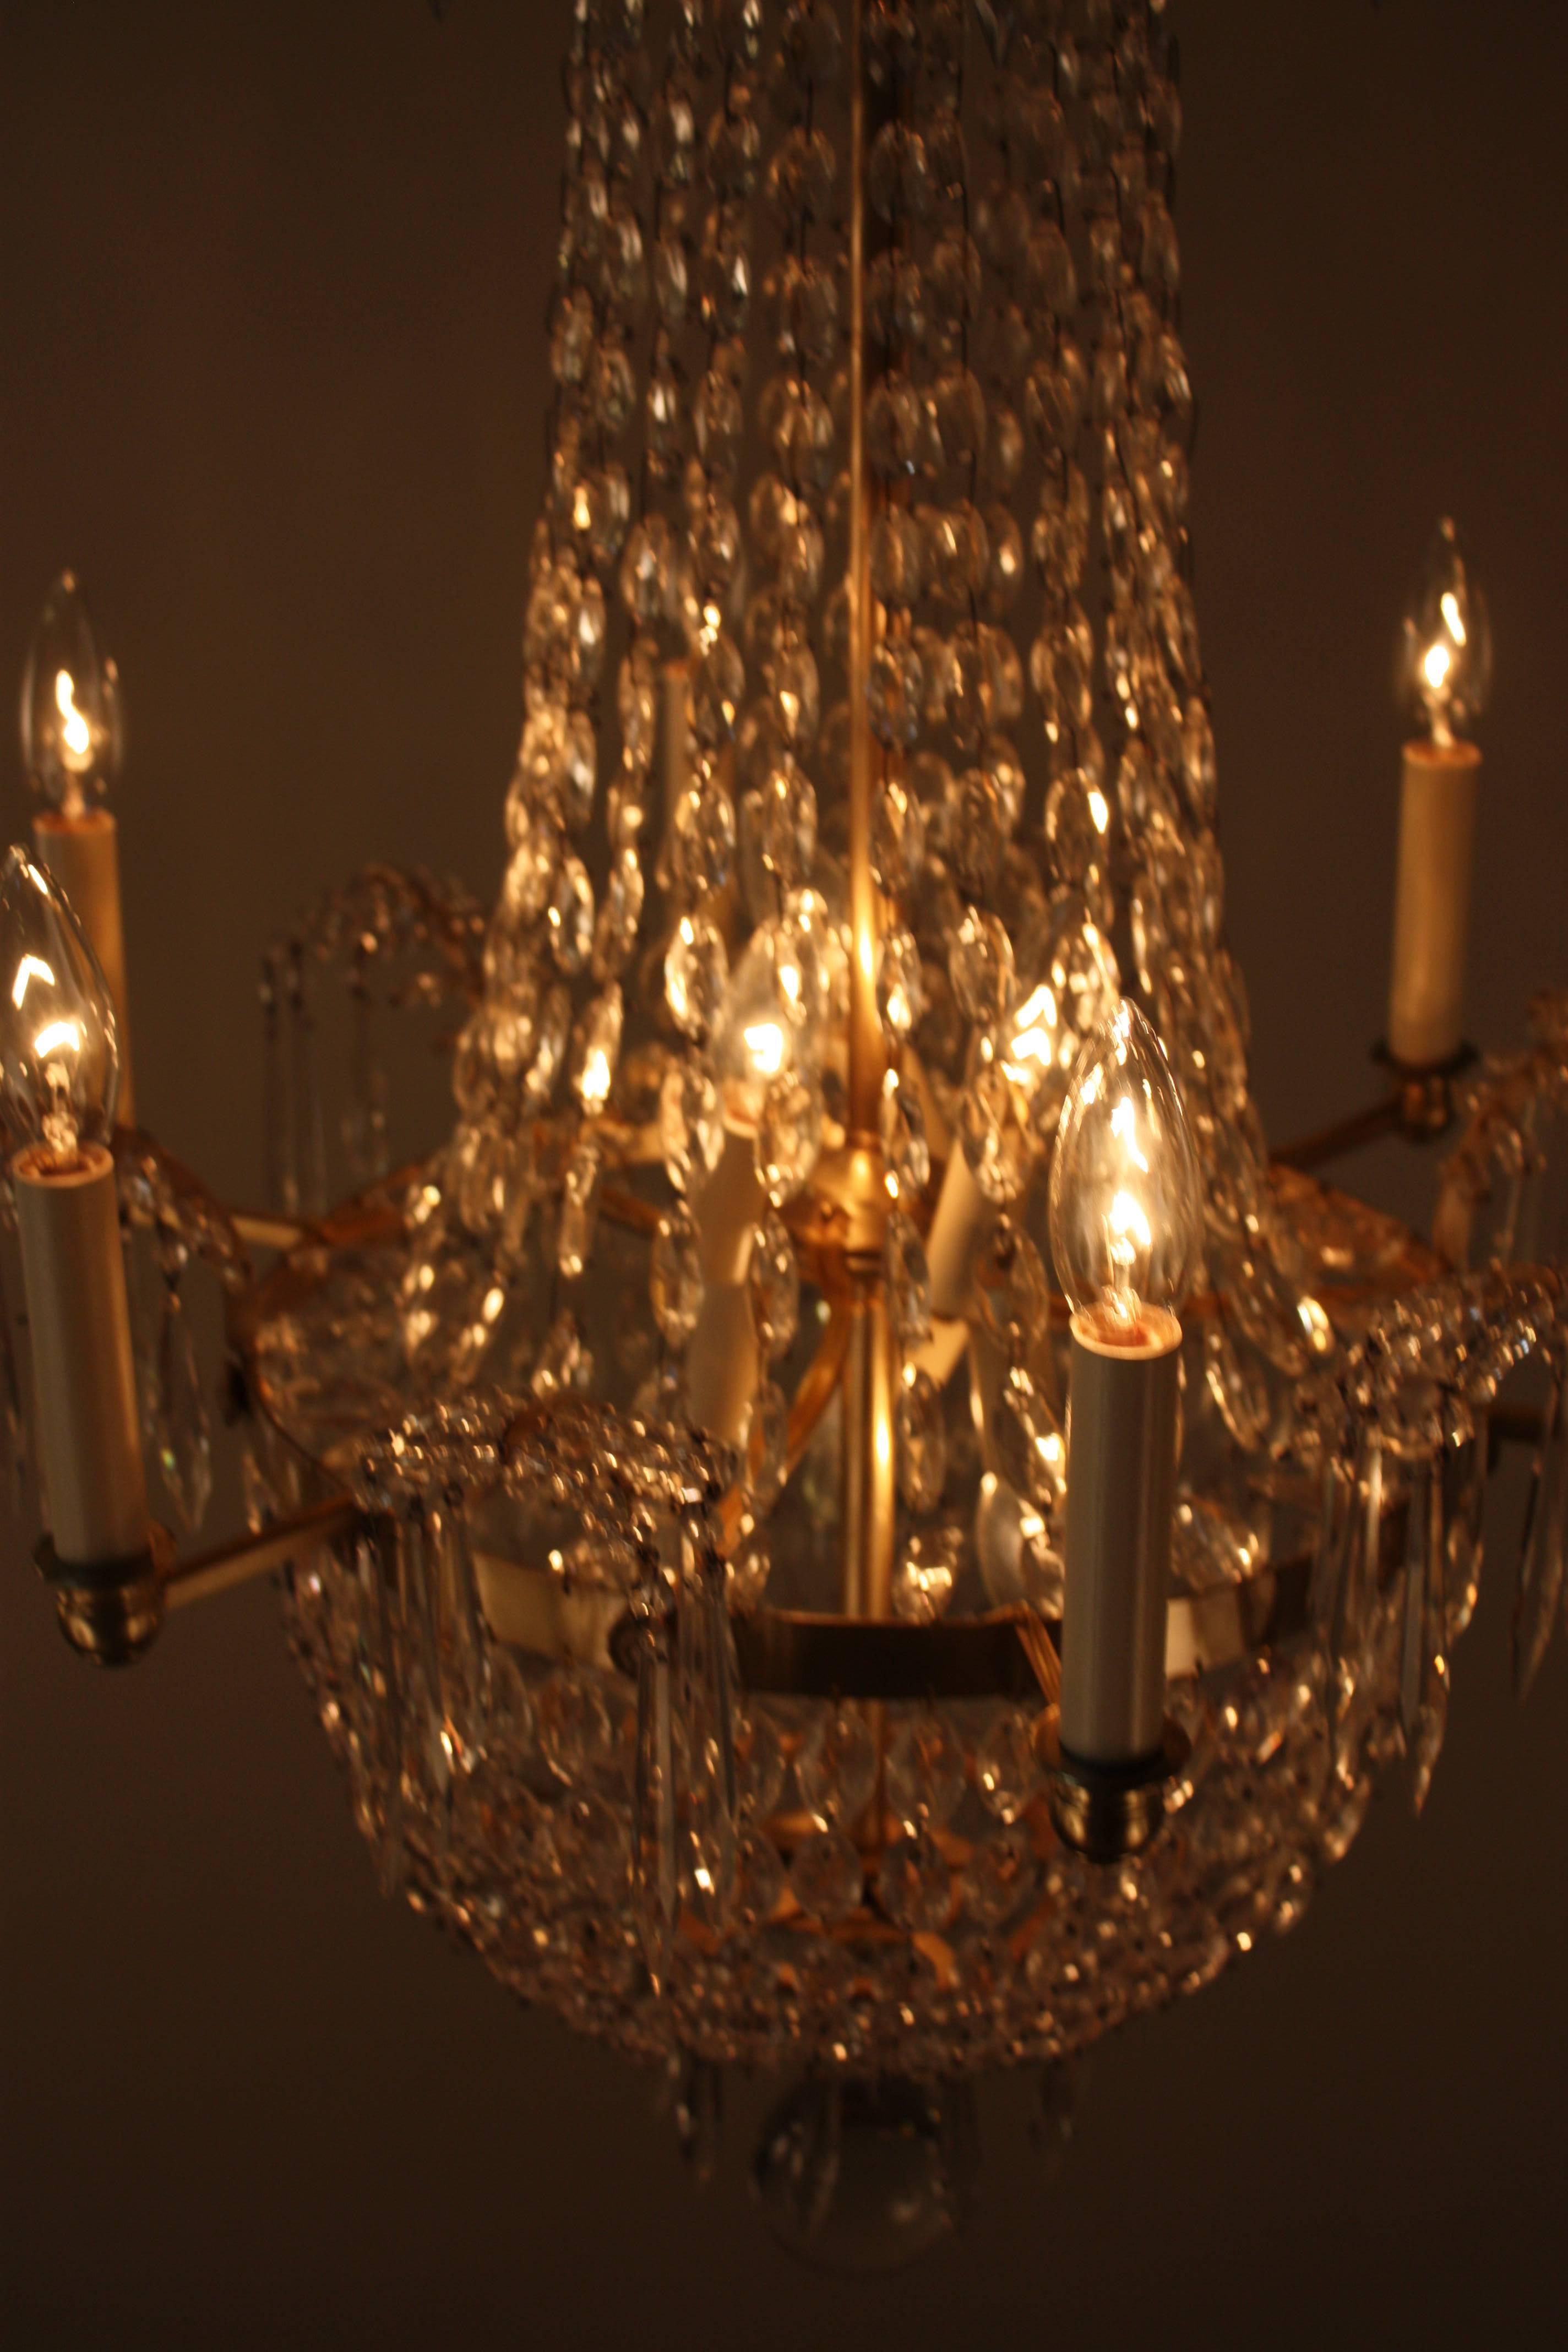 Electrified late 19th century crystal candle burning chandelier.
Six arm 12 lights 60watts each.
Minimum height with two links of chain fully installed is 36